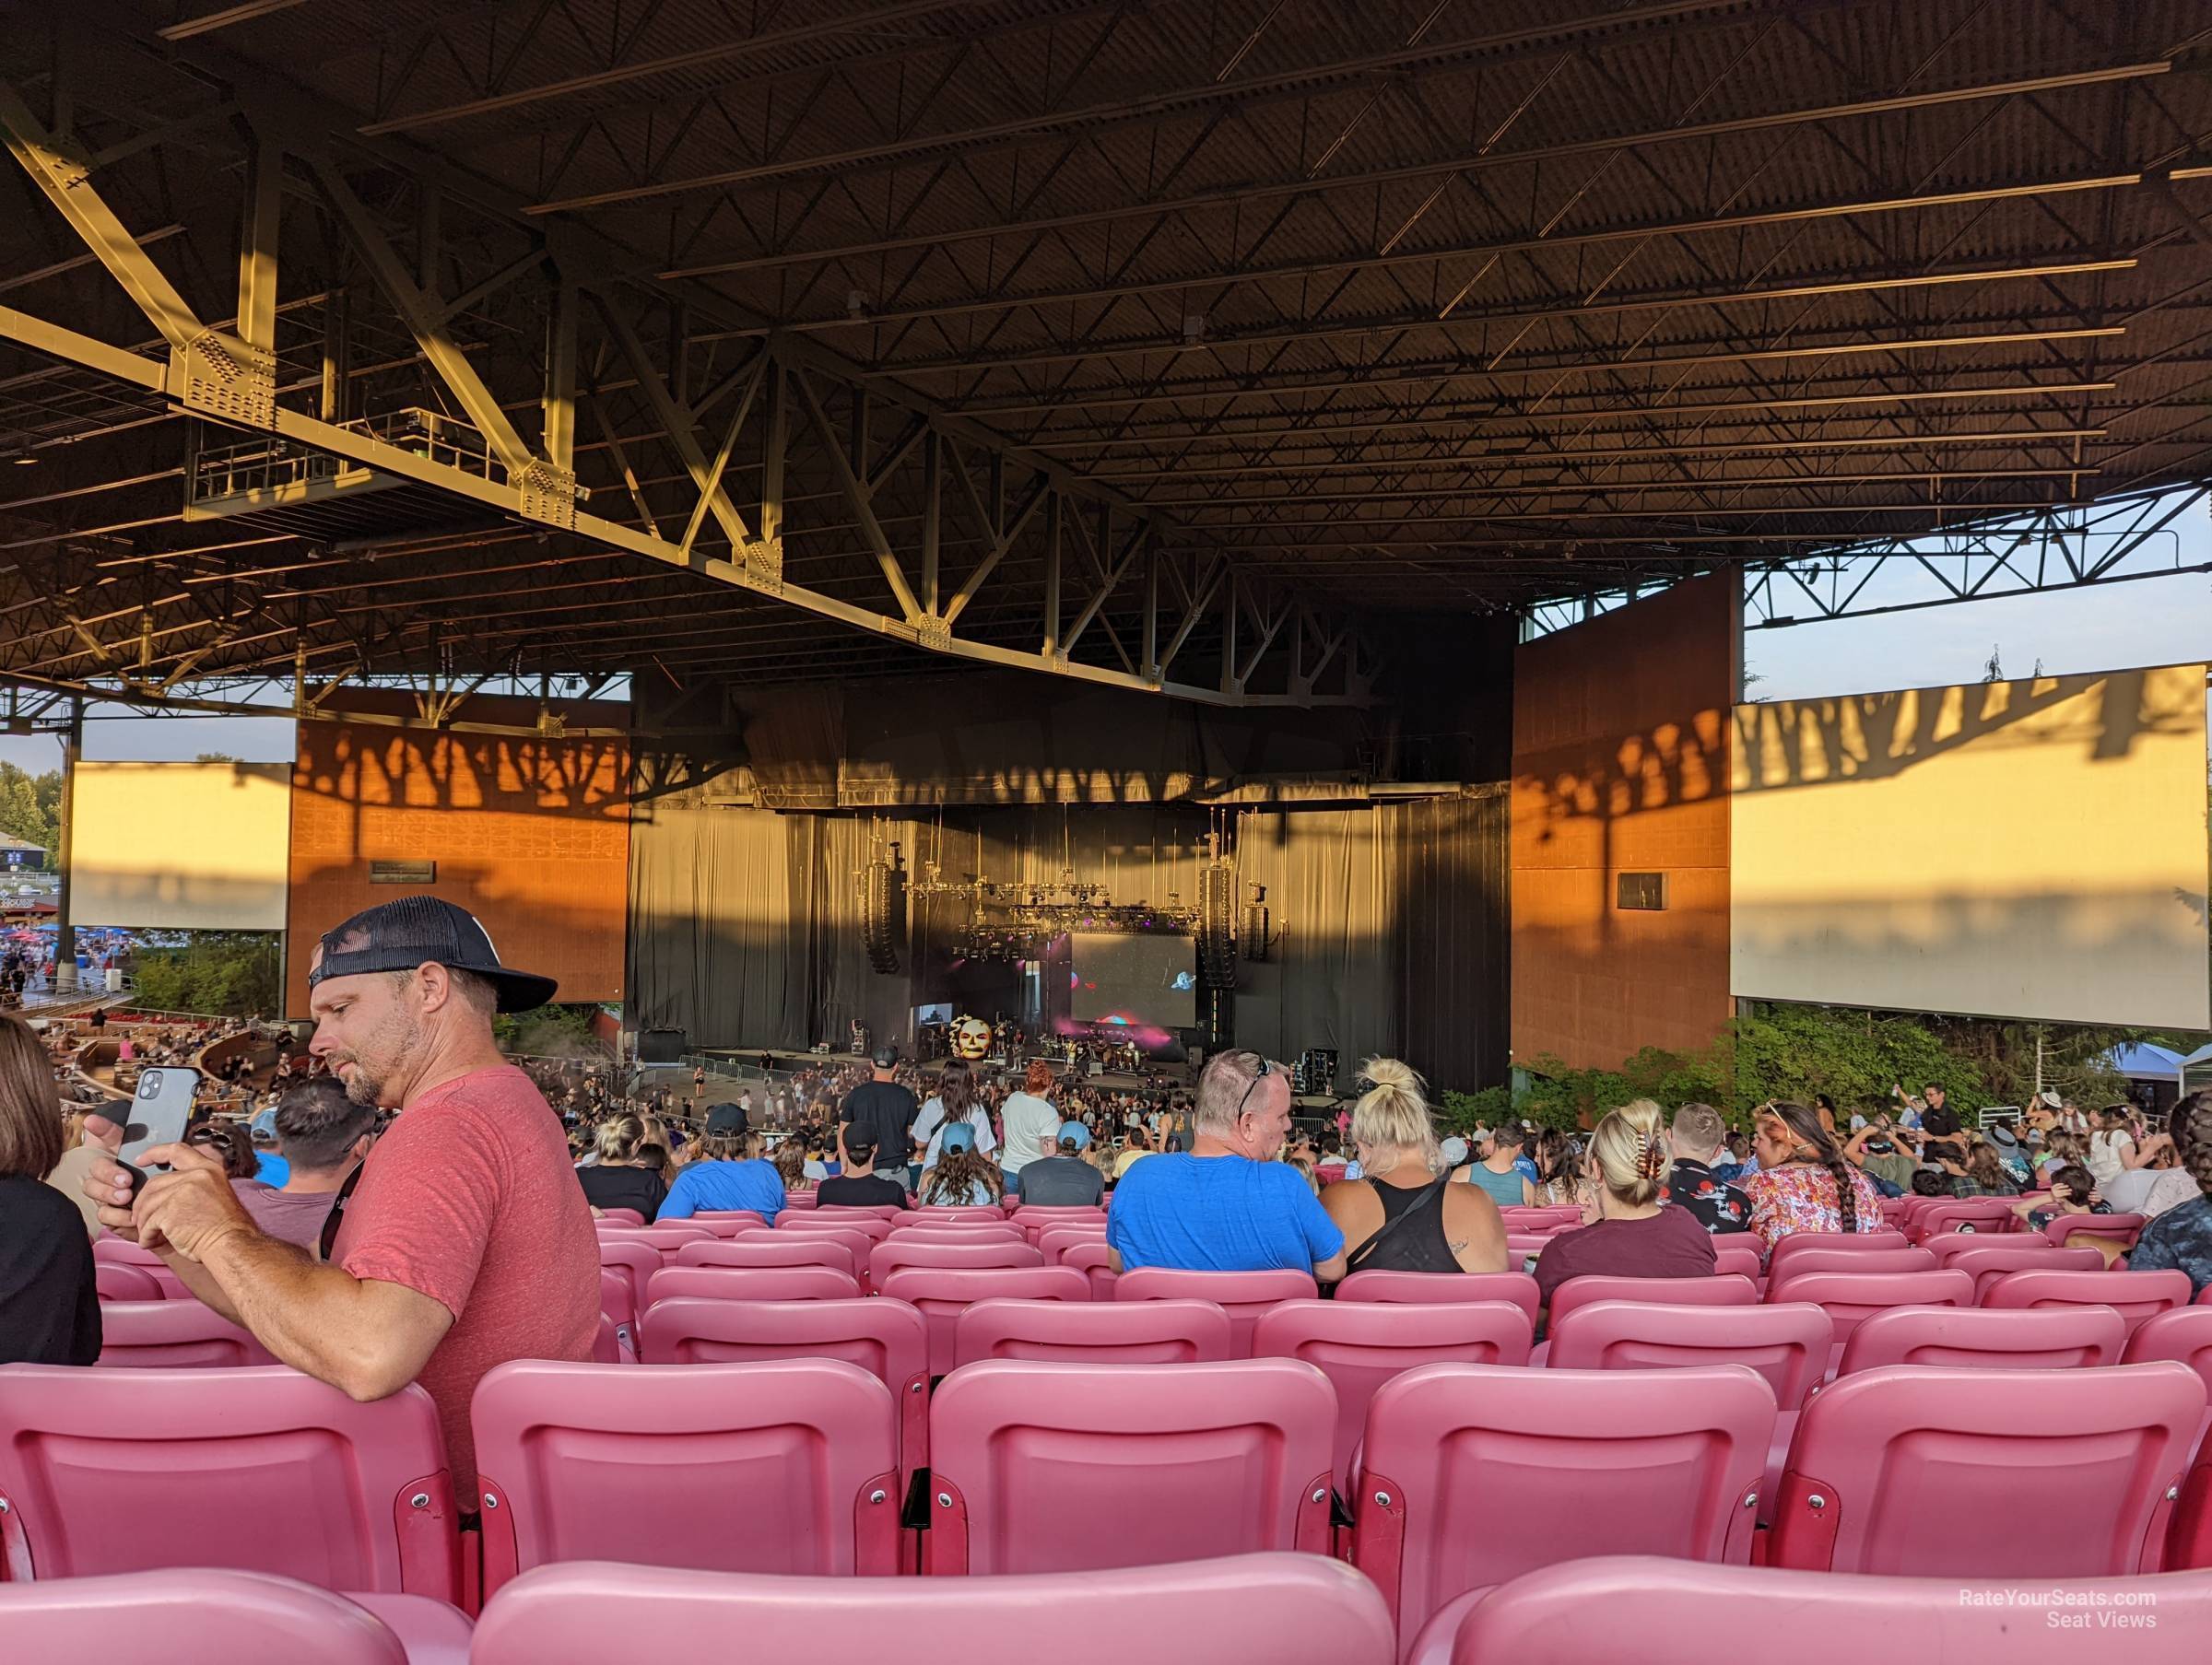 section 203, row 32 seat view  - white river amphitheatre